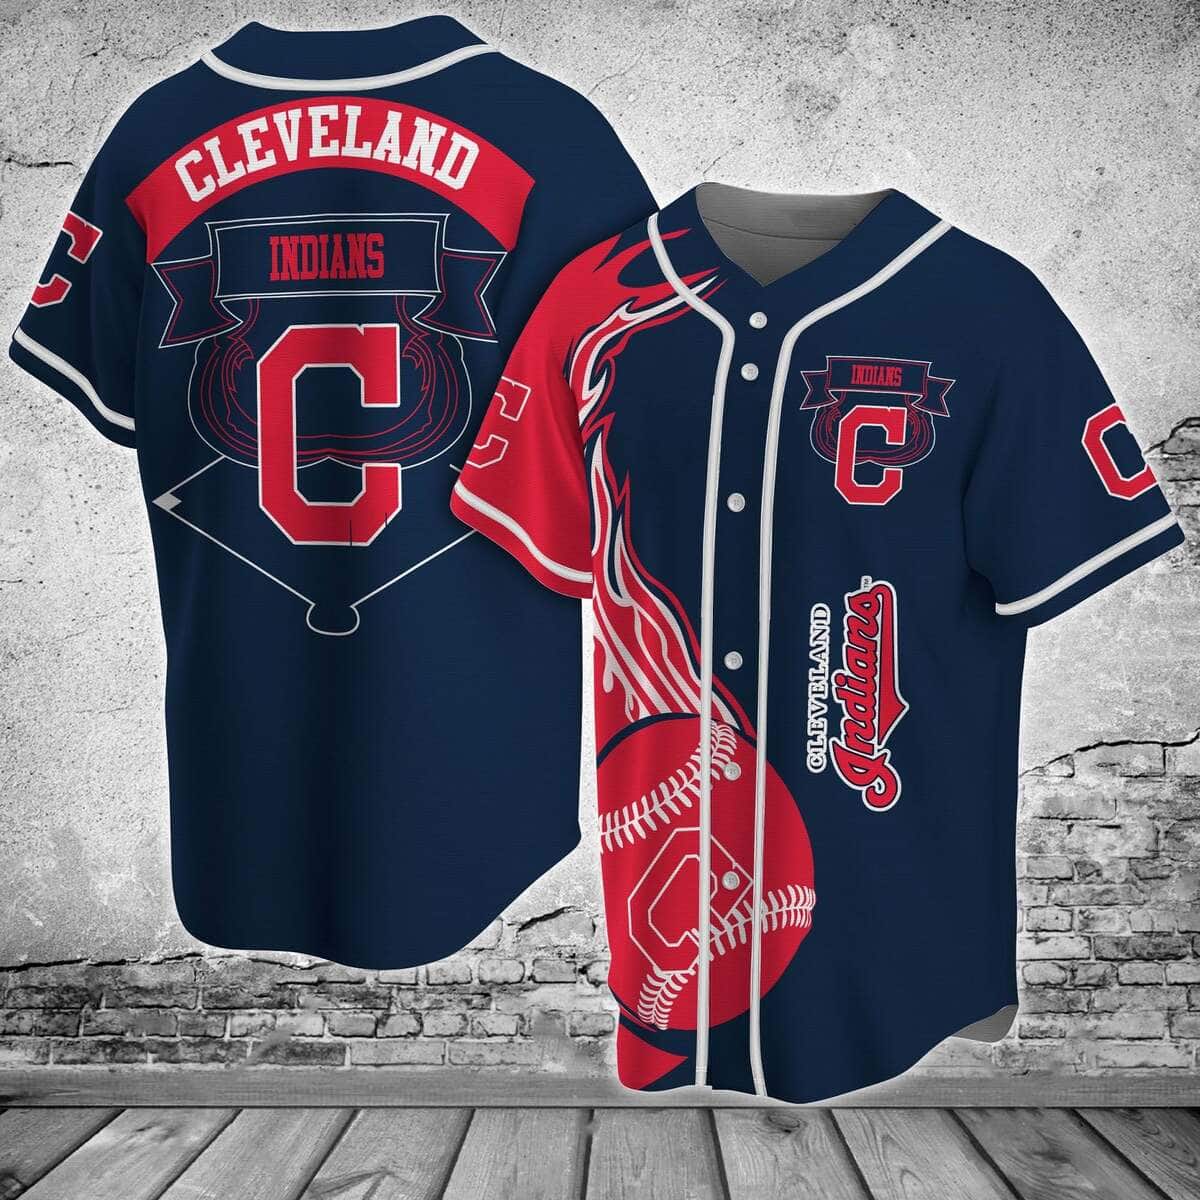 Cleveland Indians Baseball Jersey - Trending T-Shirts, Apparel & Gifts